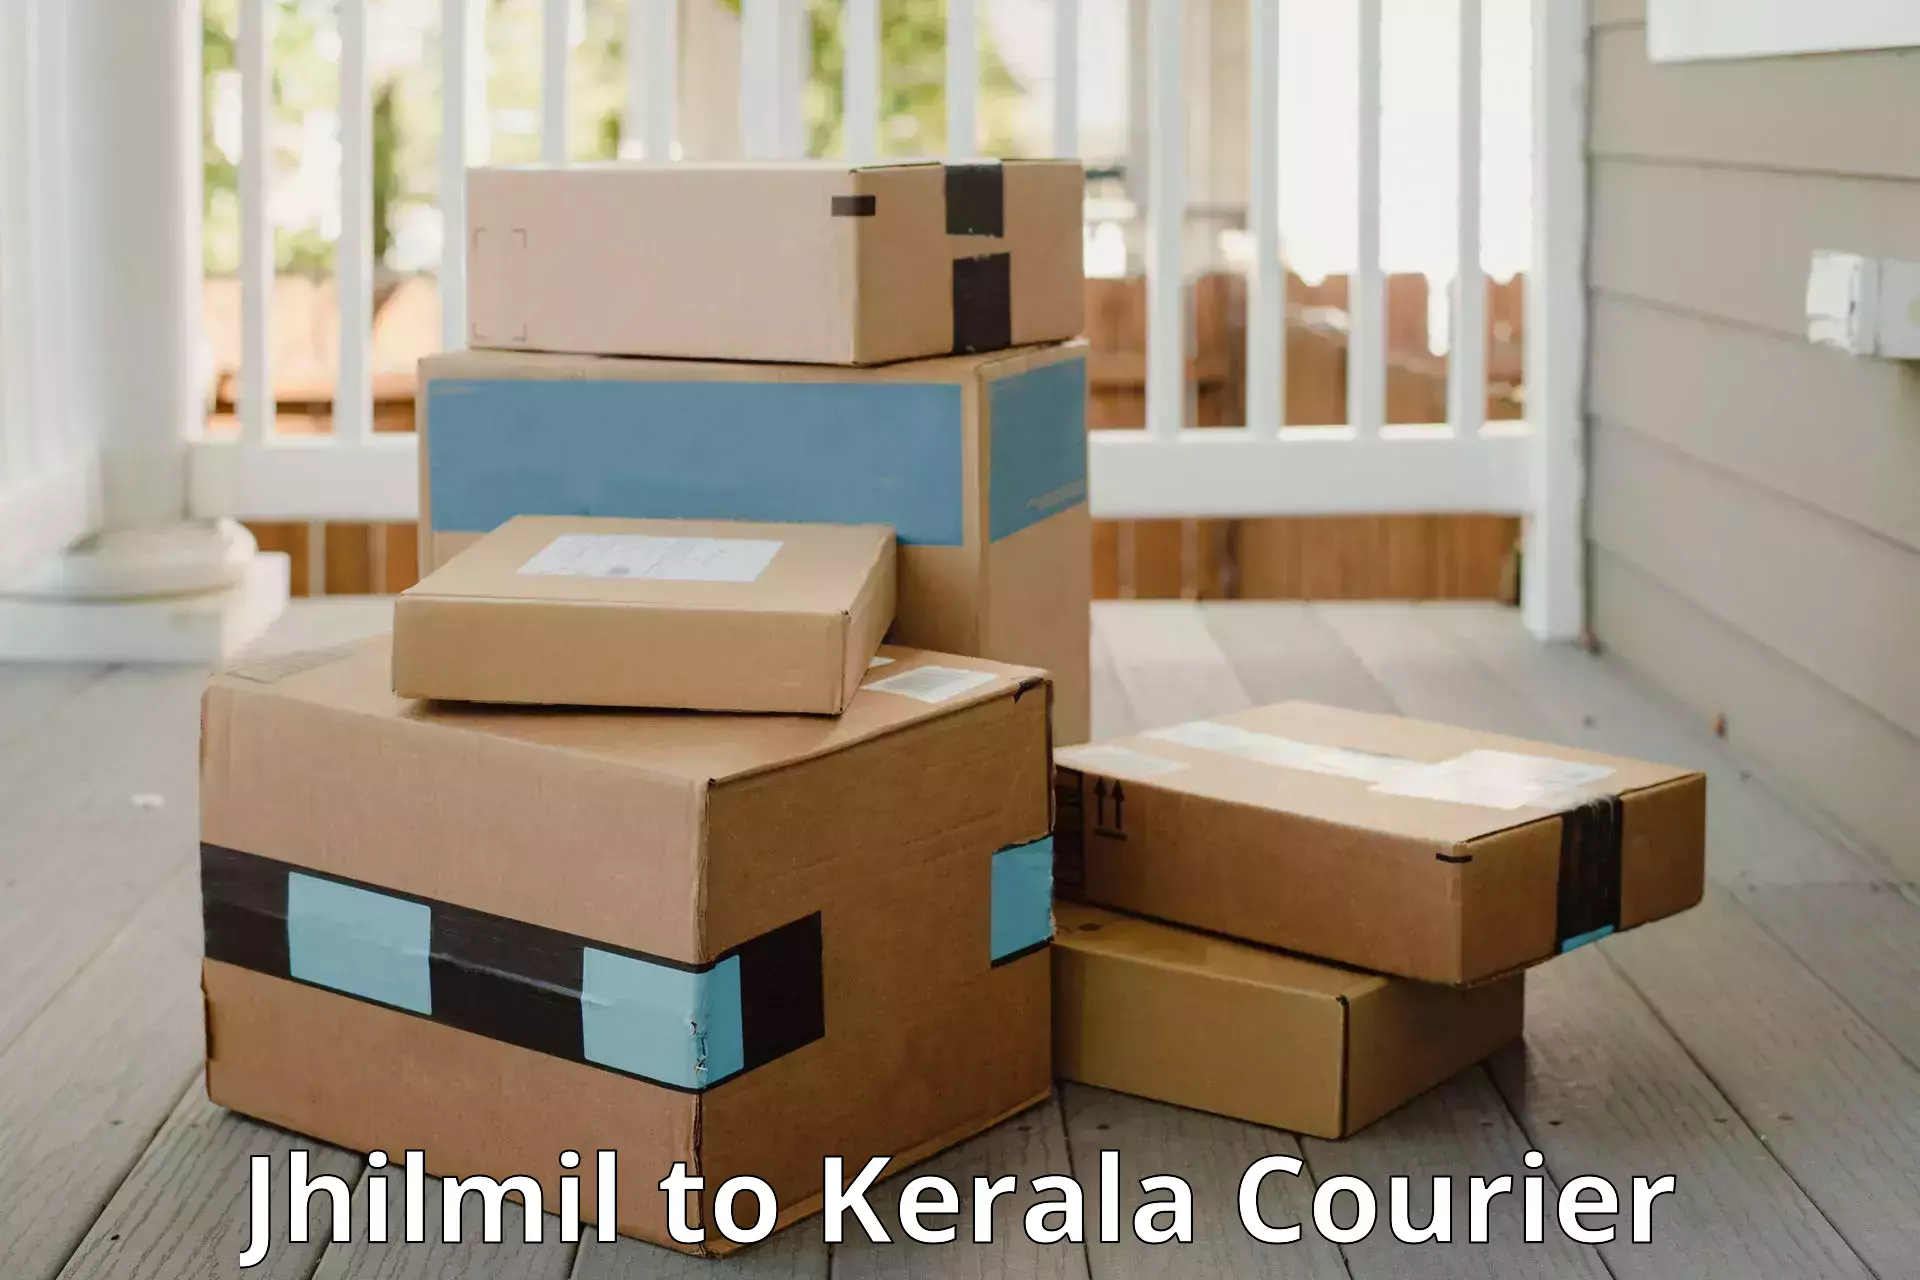 Instant baggage transport quote Jhilmil to Ponekkara